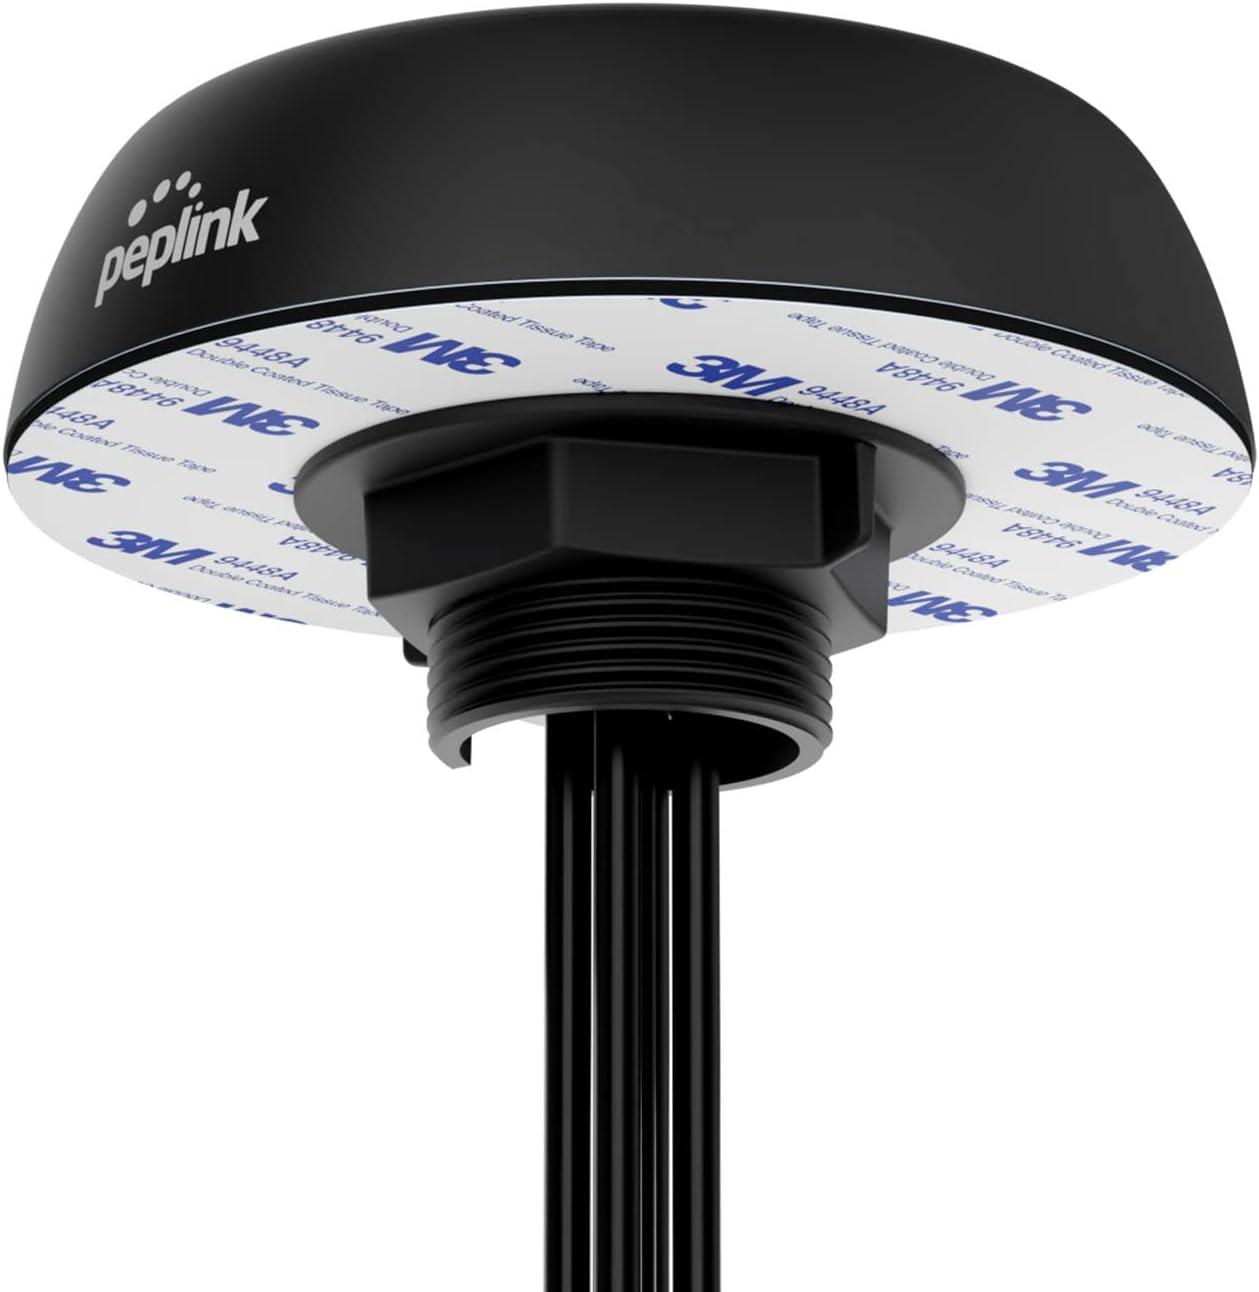 Peplink Mobility 22G 5-in-1 Cellular and Wi-Fi Antenna System with